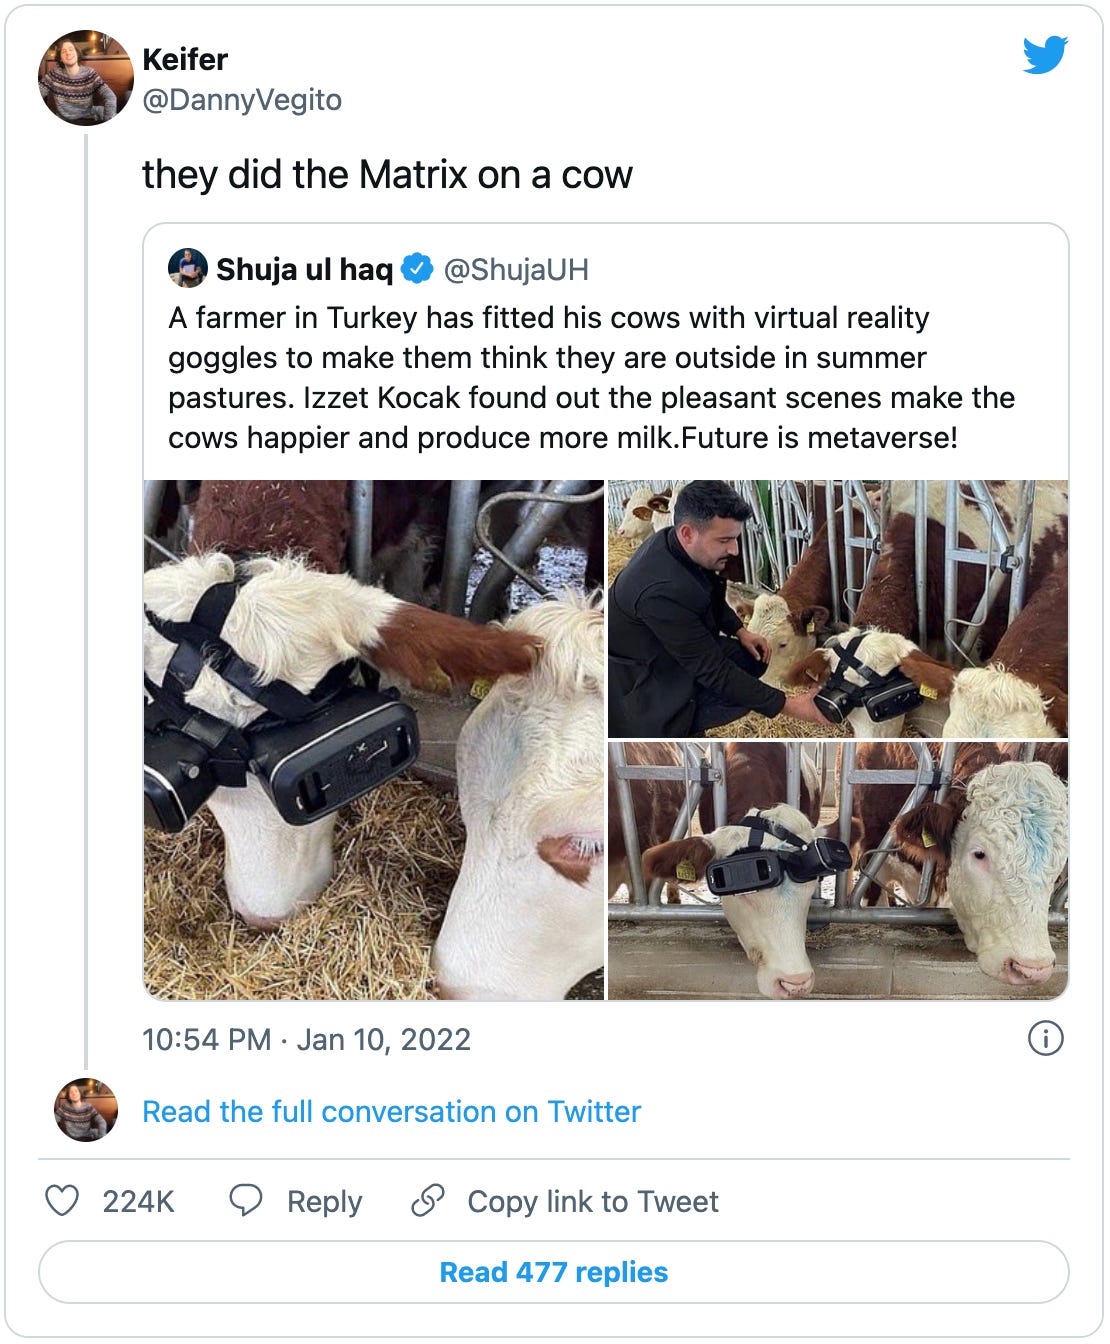 Tweet from @DannyVegito that says “they did the Matrix on a cow” and quotes a tweet from @ShujaUH that says “A farmer in Turkey has fitted his cows with virtual reality goggles to make them think they are outside in summer pastures. Izzet Kocak found out the pleasant scenes make the cows happier and produce more milk.Future is metaverse!” and has three pictures of what does indeed appear to be a cow wearing two VR headsets over its eyes. 